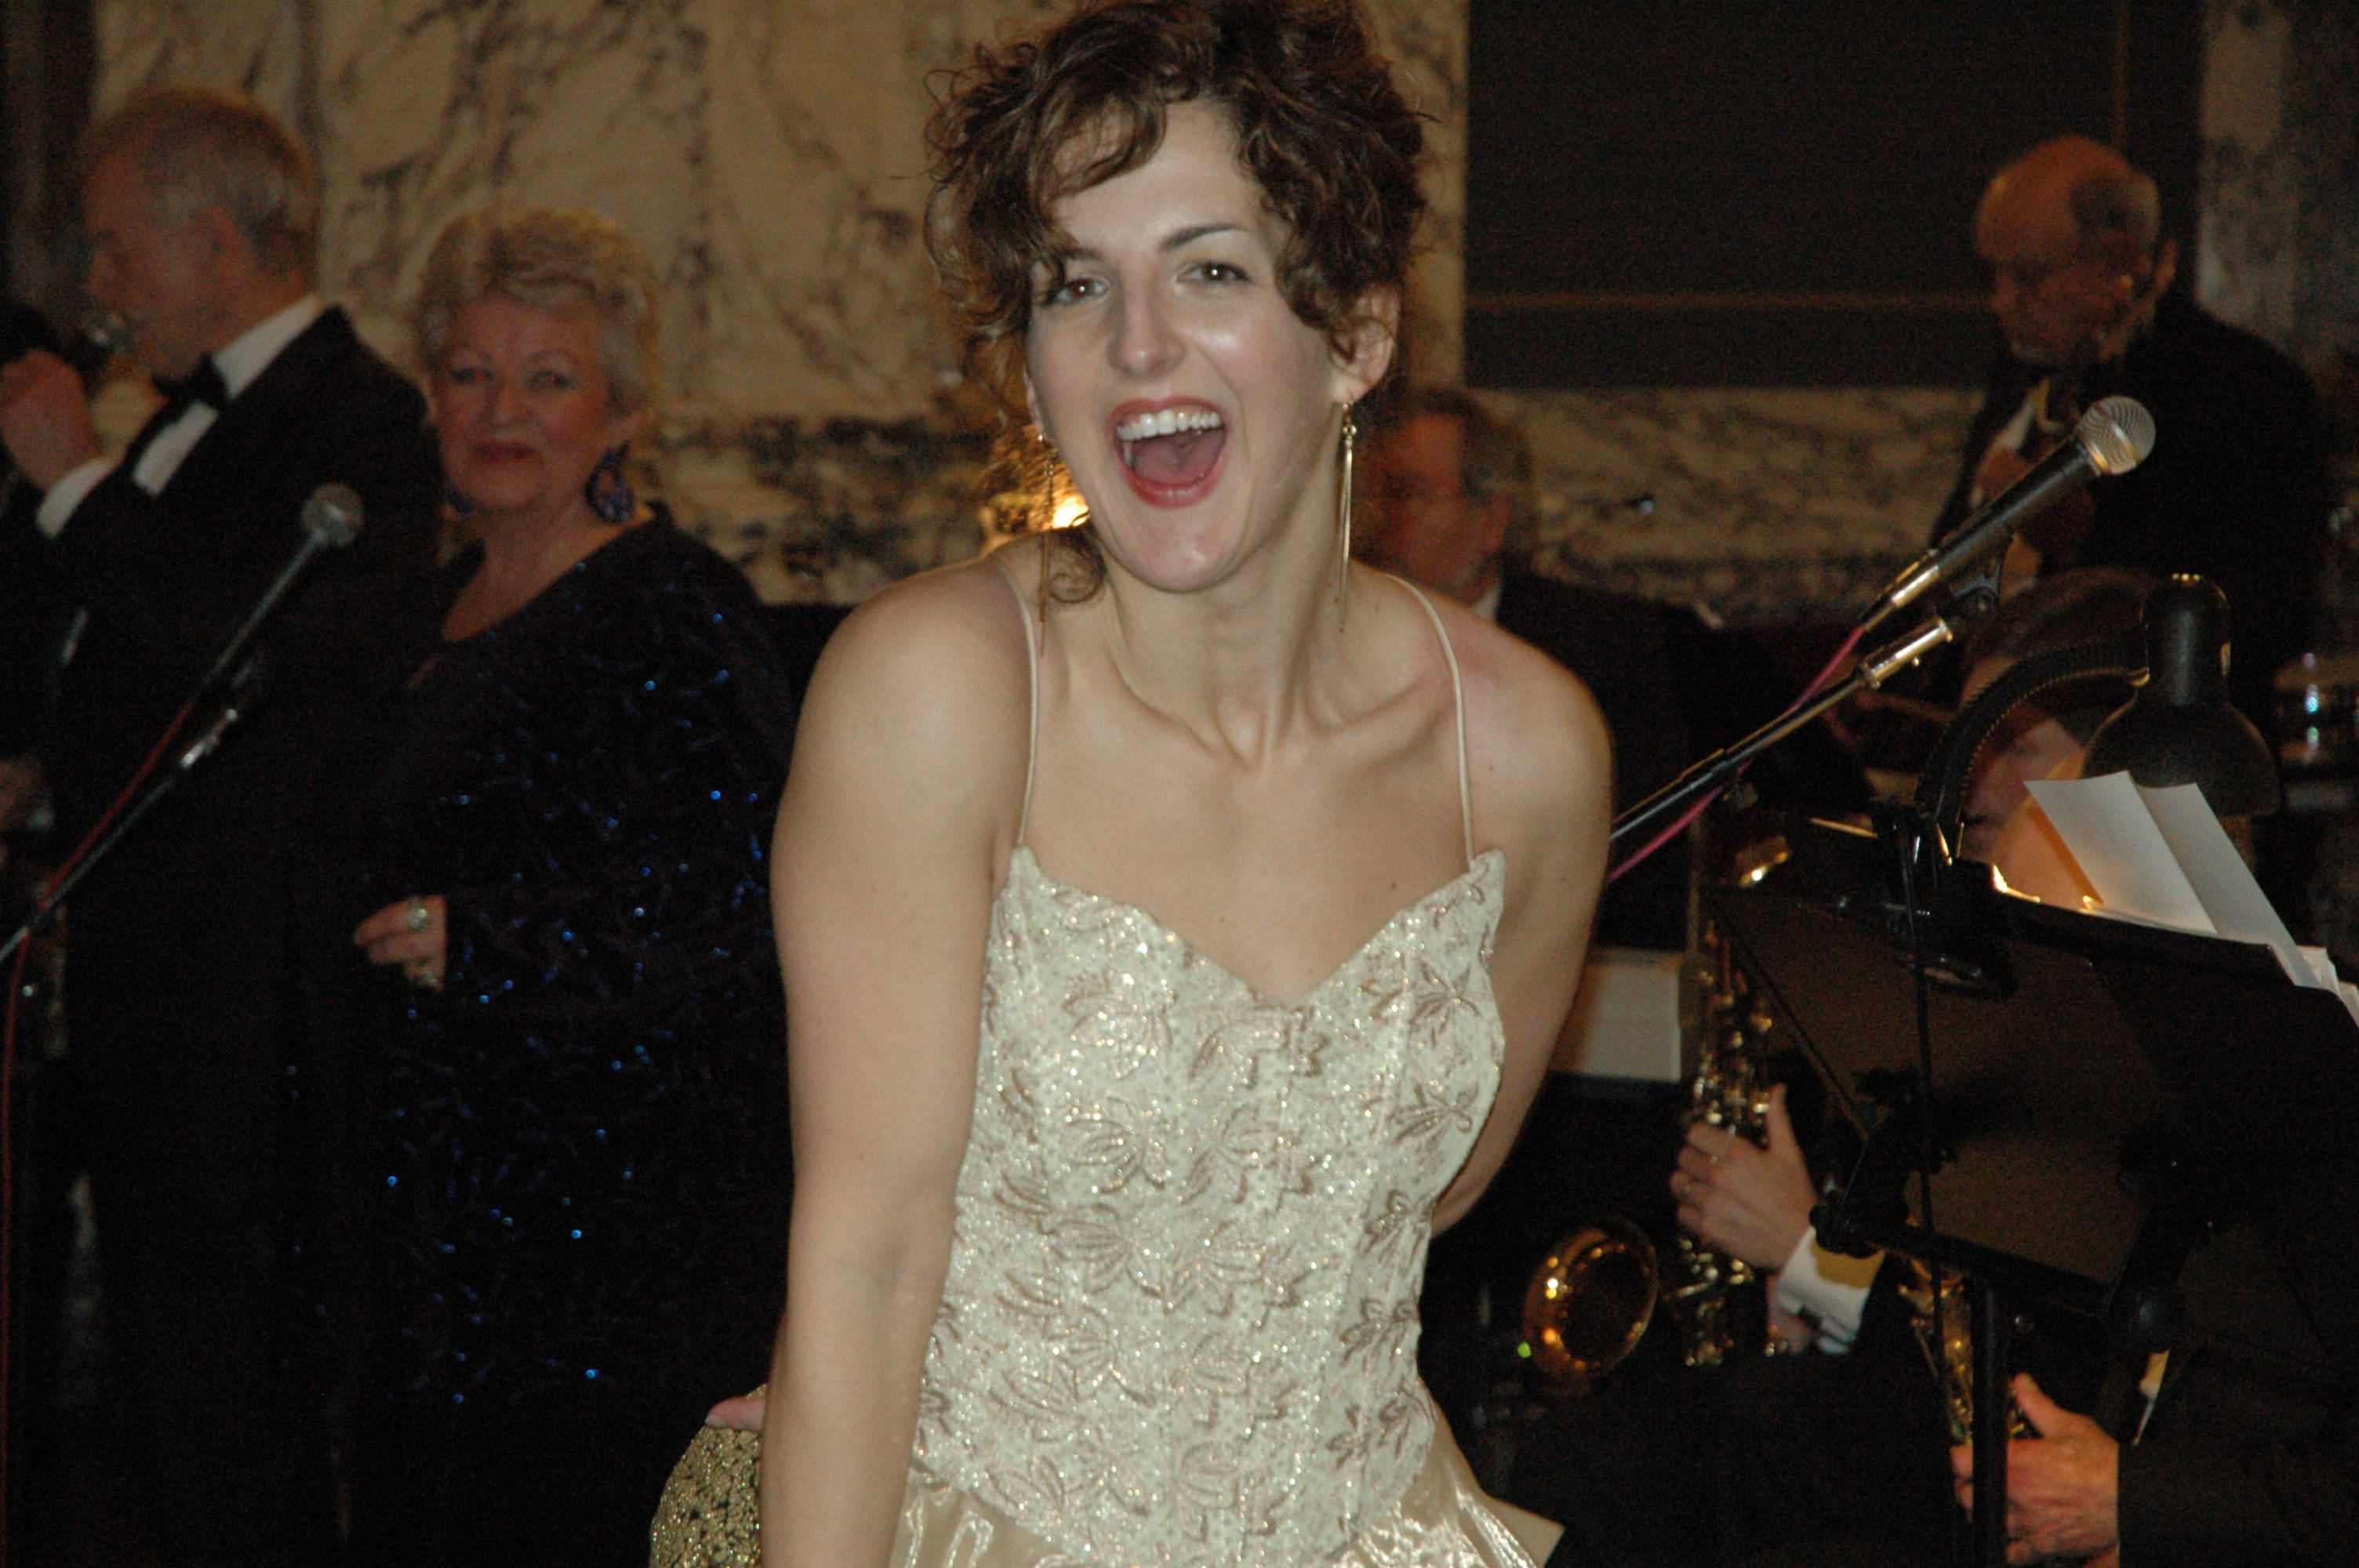 MARGEN CARLSON at the 2013 GOVERNOR'S INAUGURAL BALL